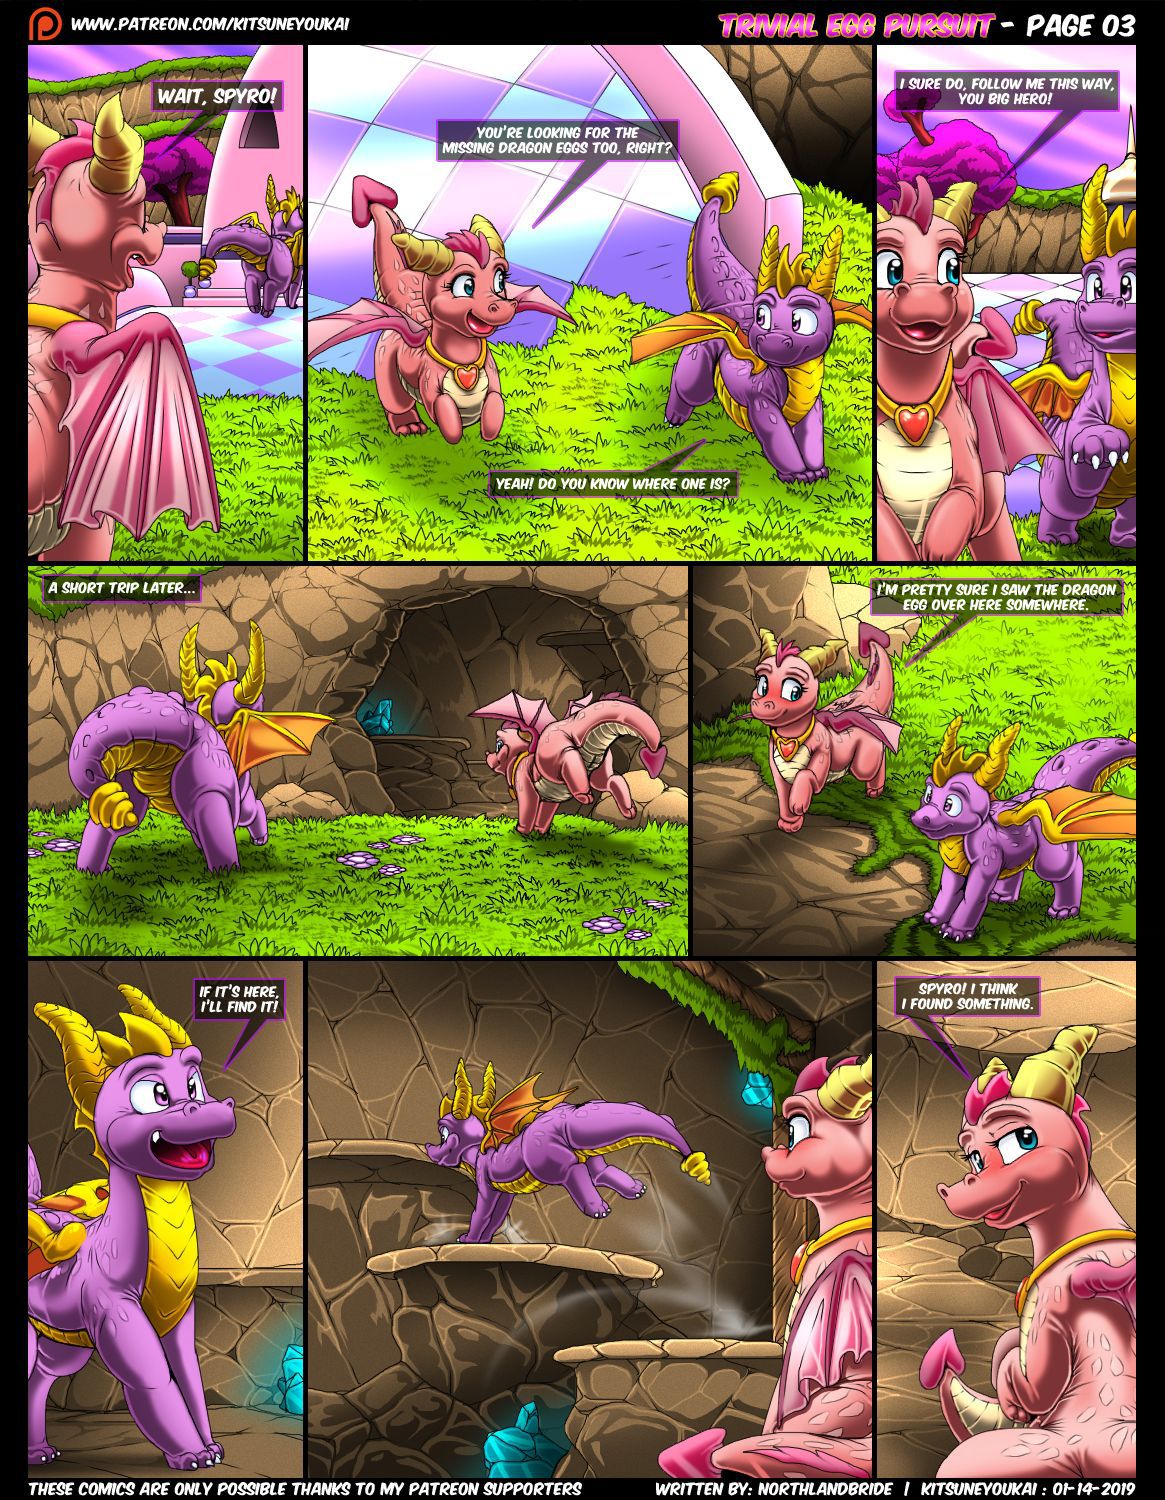 Trivial Egg Pursuit (Ongoing) by Kitsune Youkai (Fixed Page 4) 3